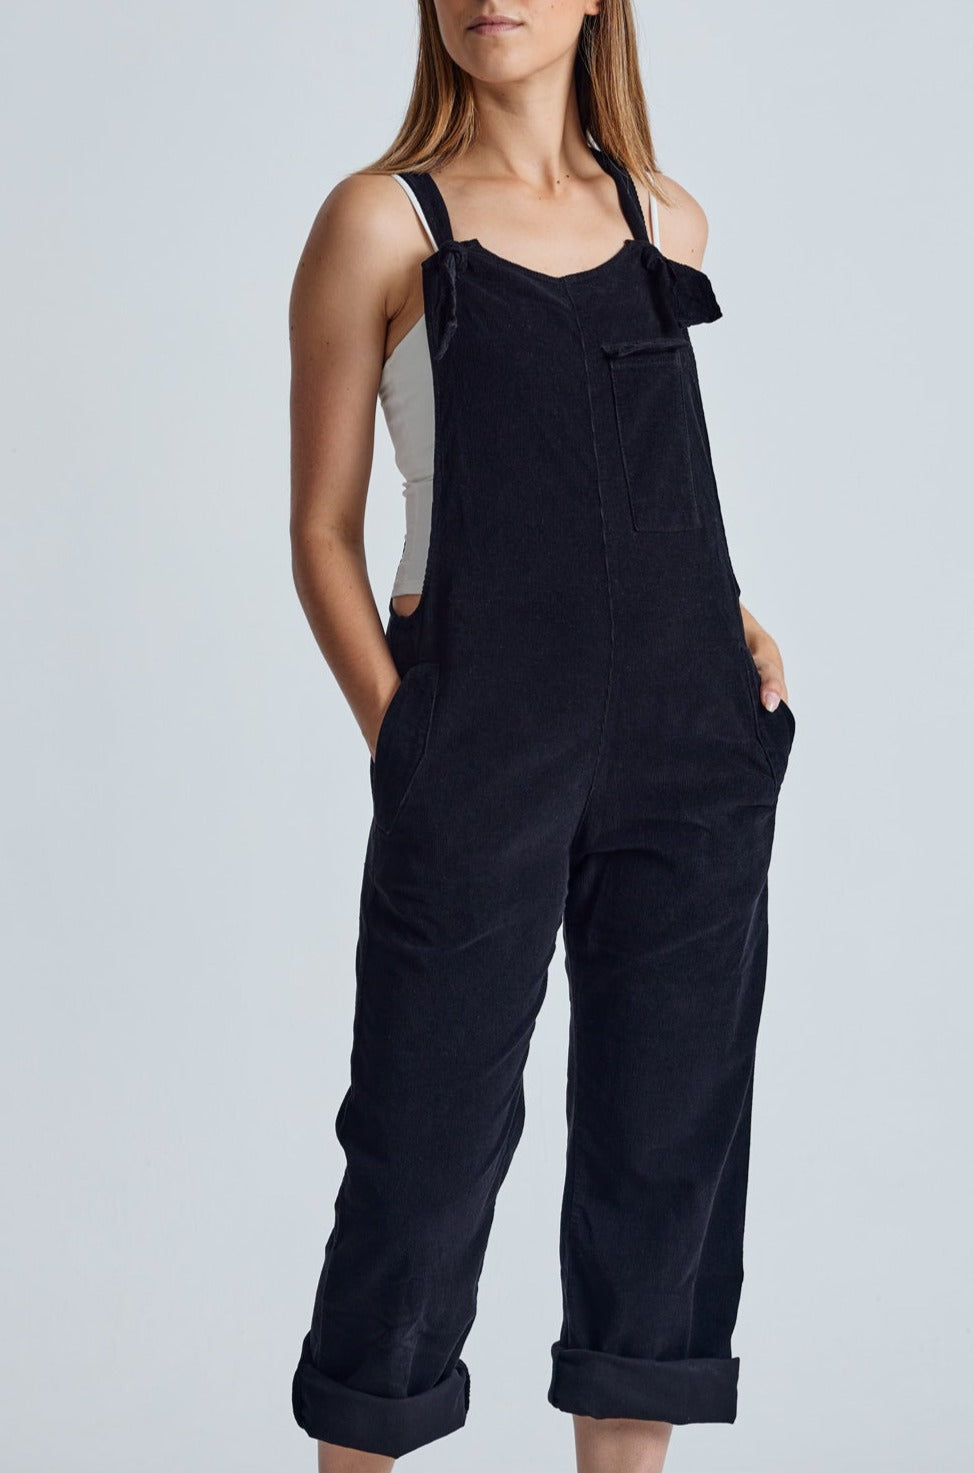 MARY-LOU Black - GOTS Organic Cotton Cord Dungarees by Flax & Loom, XL